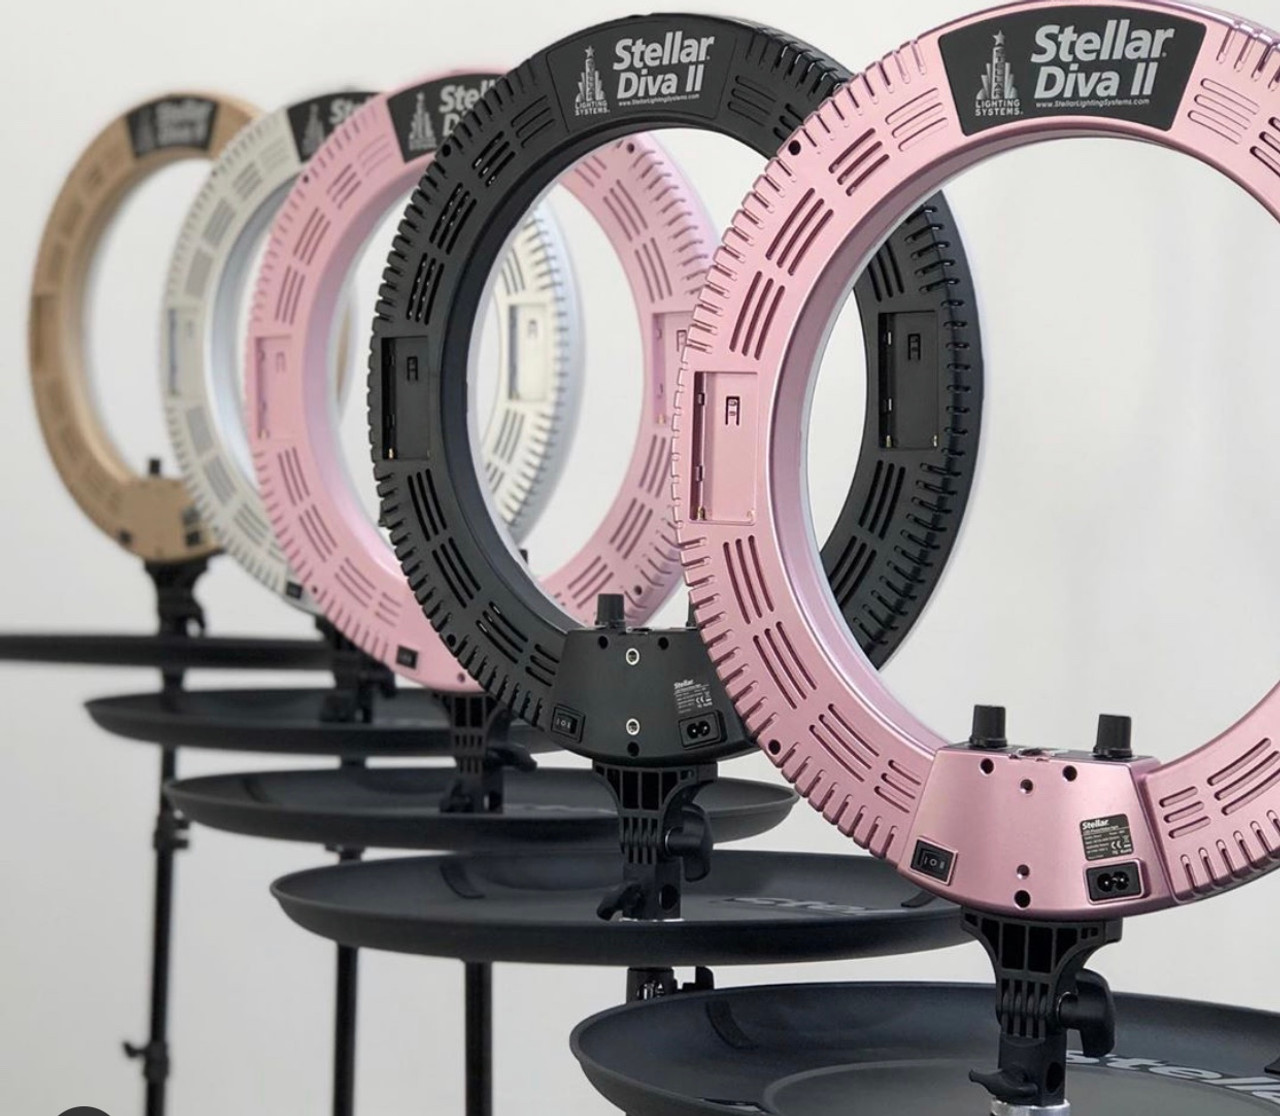 The New Stellar Diva ll Pro Ring Light + Photo Stand and Tray+HOLIDAY GIFT  - Stellar Lighting Systems